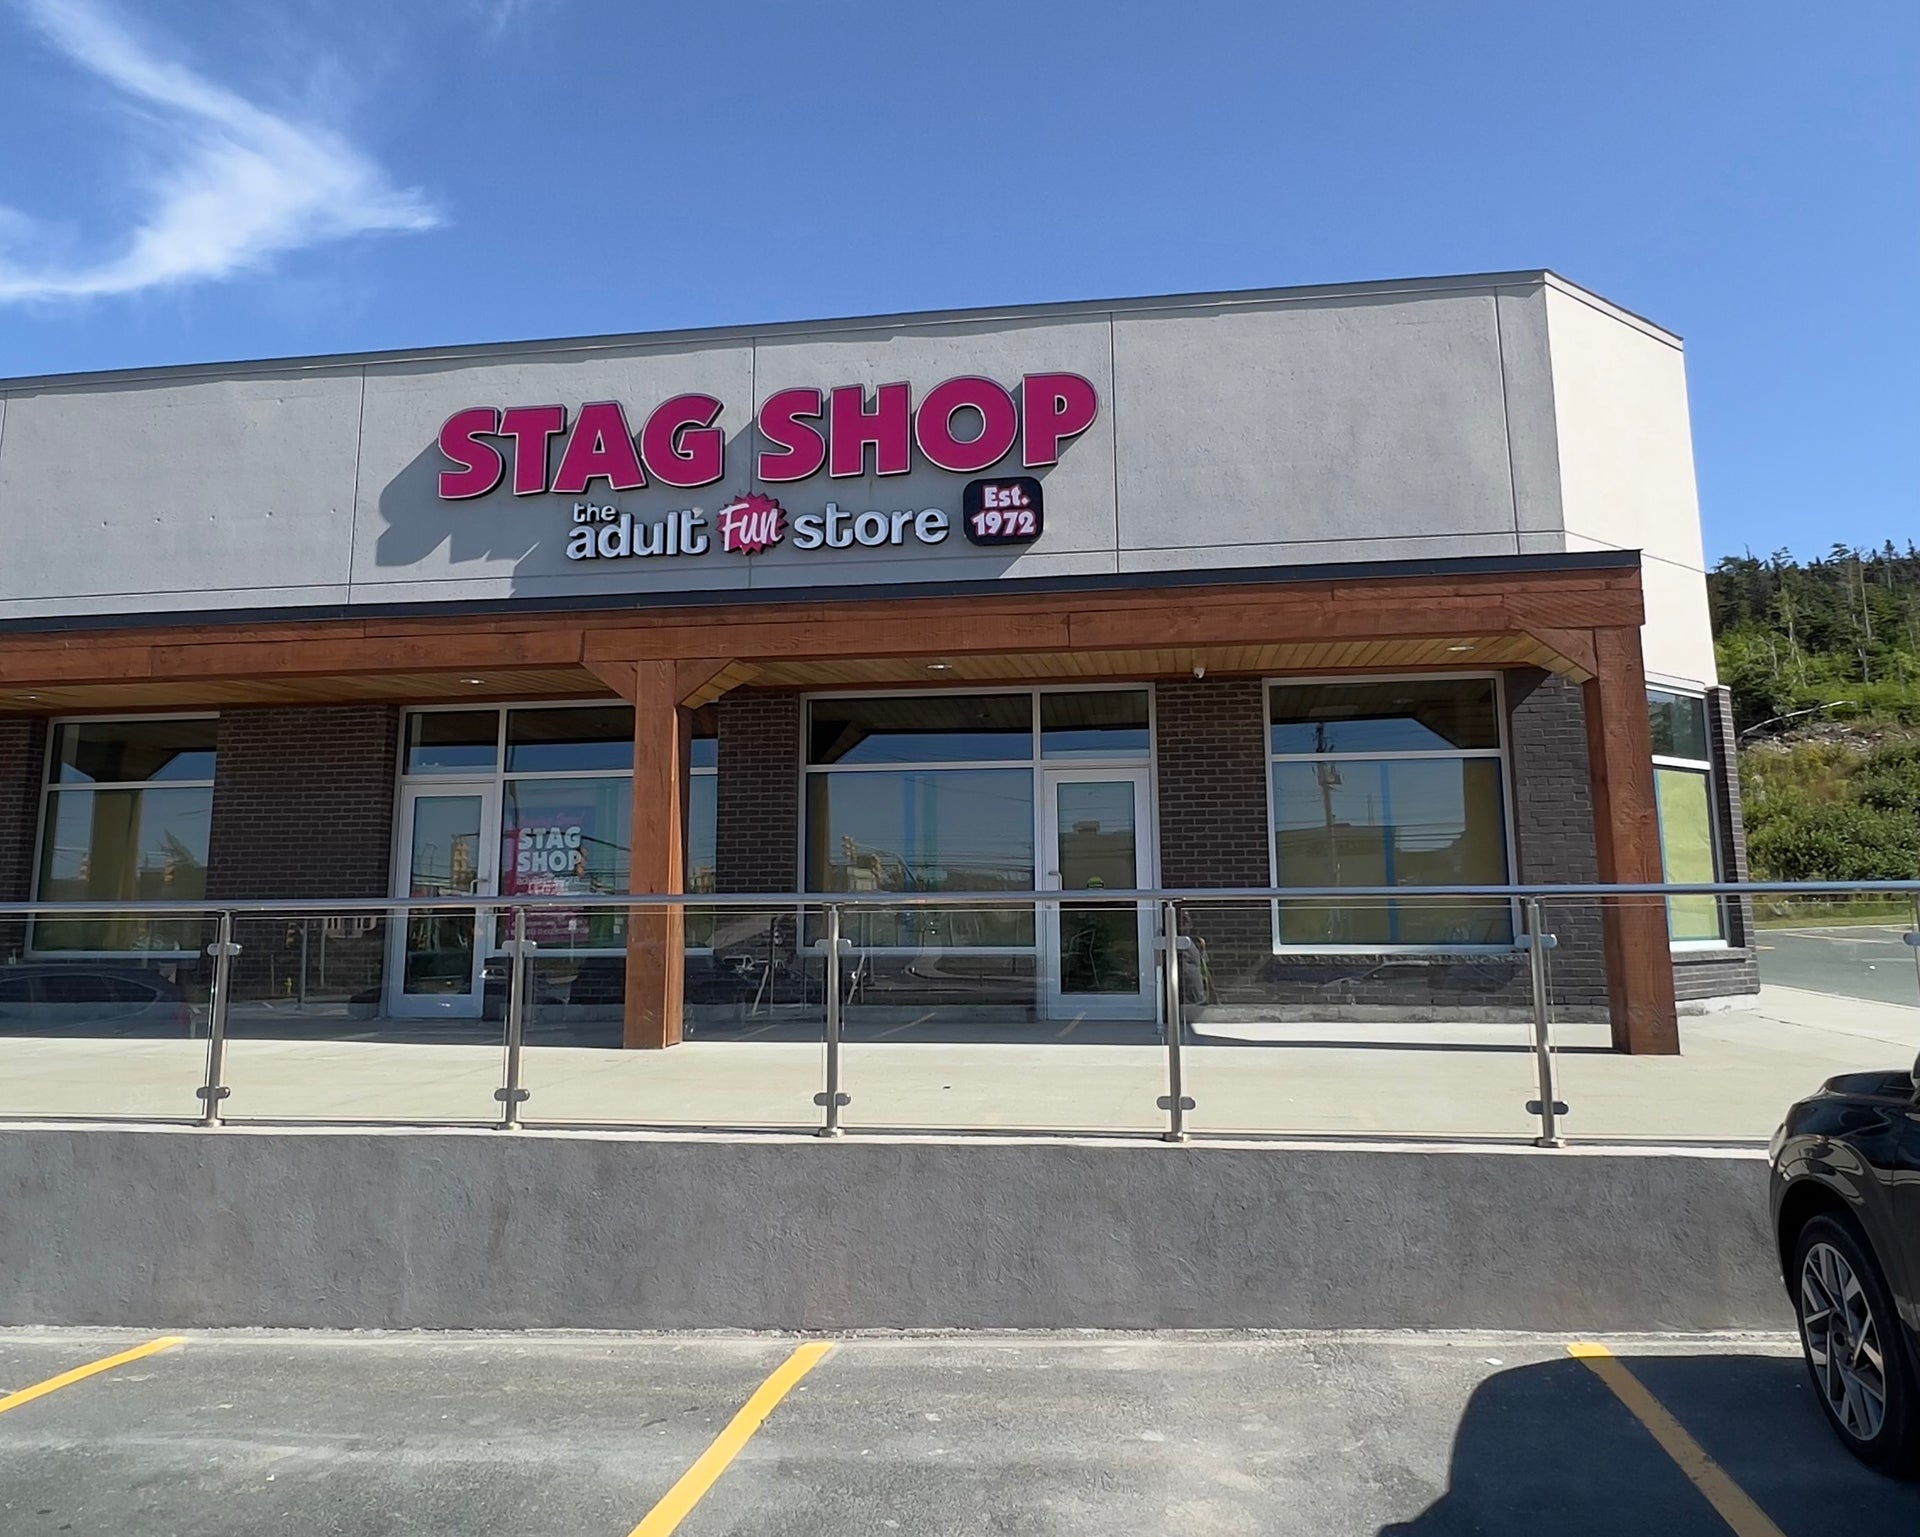 Stag Shop - The Trusted Sex Store in St. John's